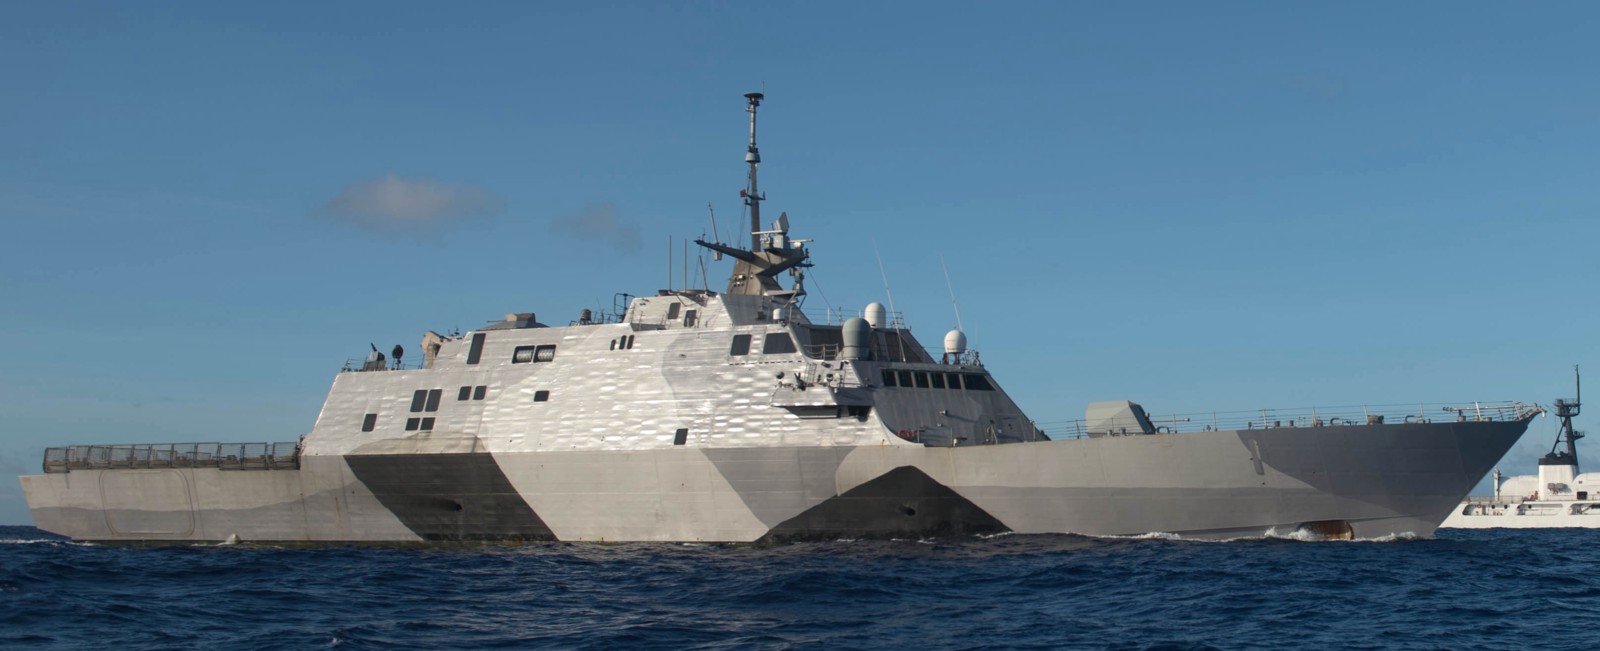 lcs-1 uss freedom class littoral combat ship us navy 19